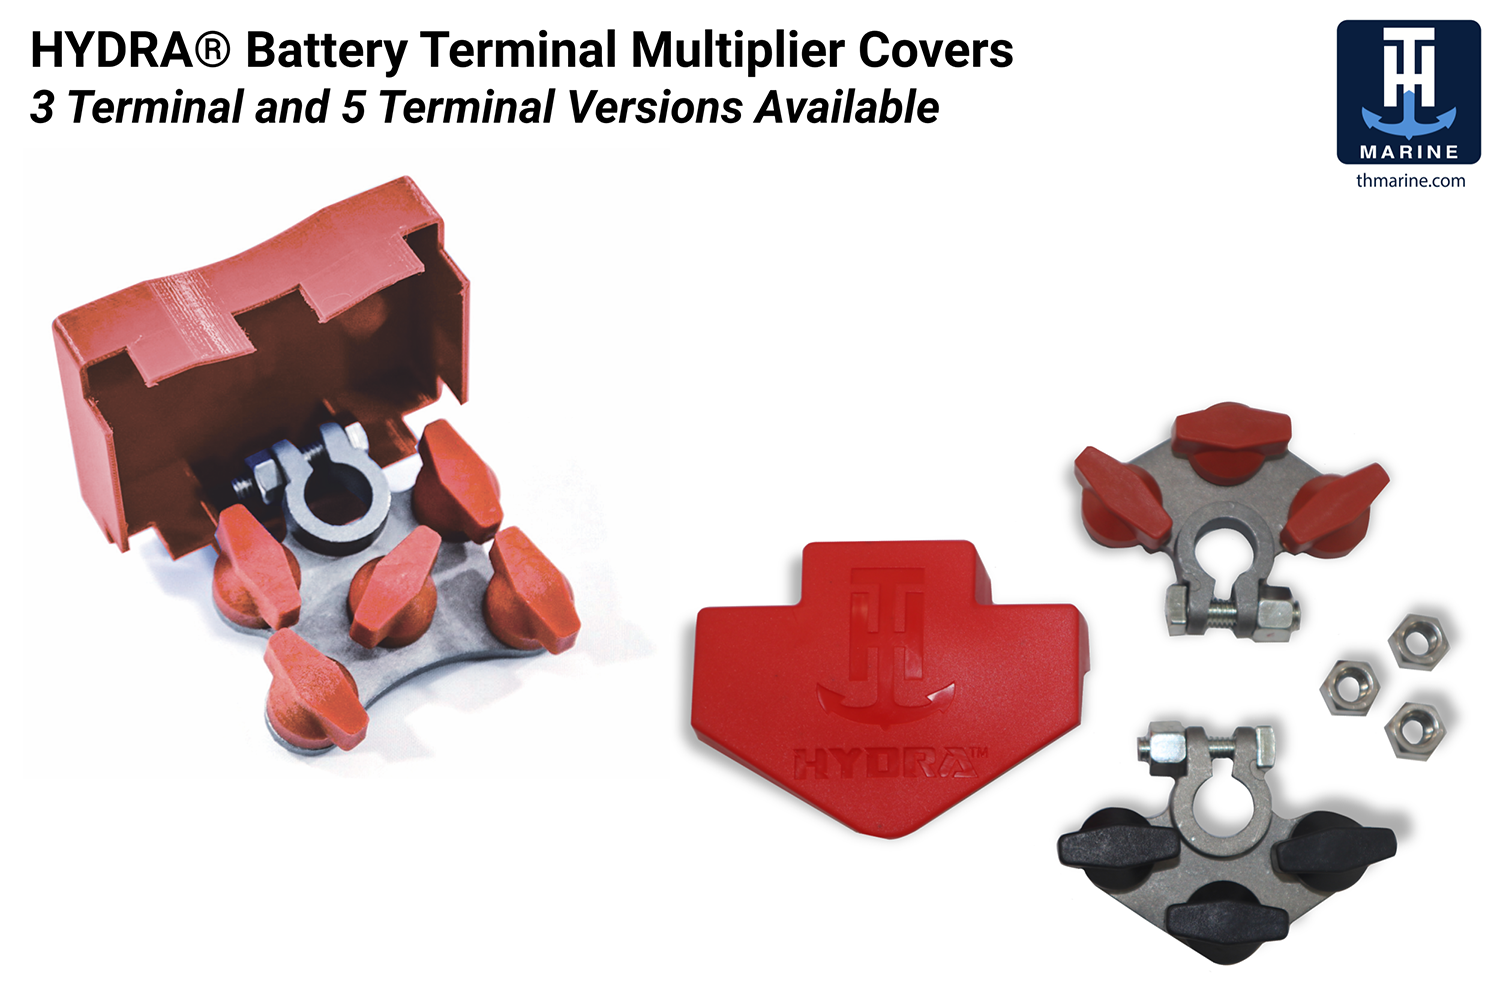 <p><b>Hydra Cover</b></p>
<p>Between the 3-post and 5-post versions of the Hydra Battery Terminal Multiplier, you can get just what you need to neatly and easily manage your marine battery connections â and with the Hydra Cover in place, you can safely protect these connections, too. Each Hydra Cover is manufactured with PVC material that is well-suited for wet / harsh environments. With these covers in place, helping prevent electrical arcing and exposure, you can enjoy even more worry-free boating knowing youâve safeguarded your electrical connections and the area surrounding your battery.</p>
<p><a href=